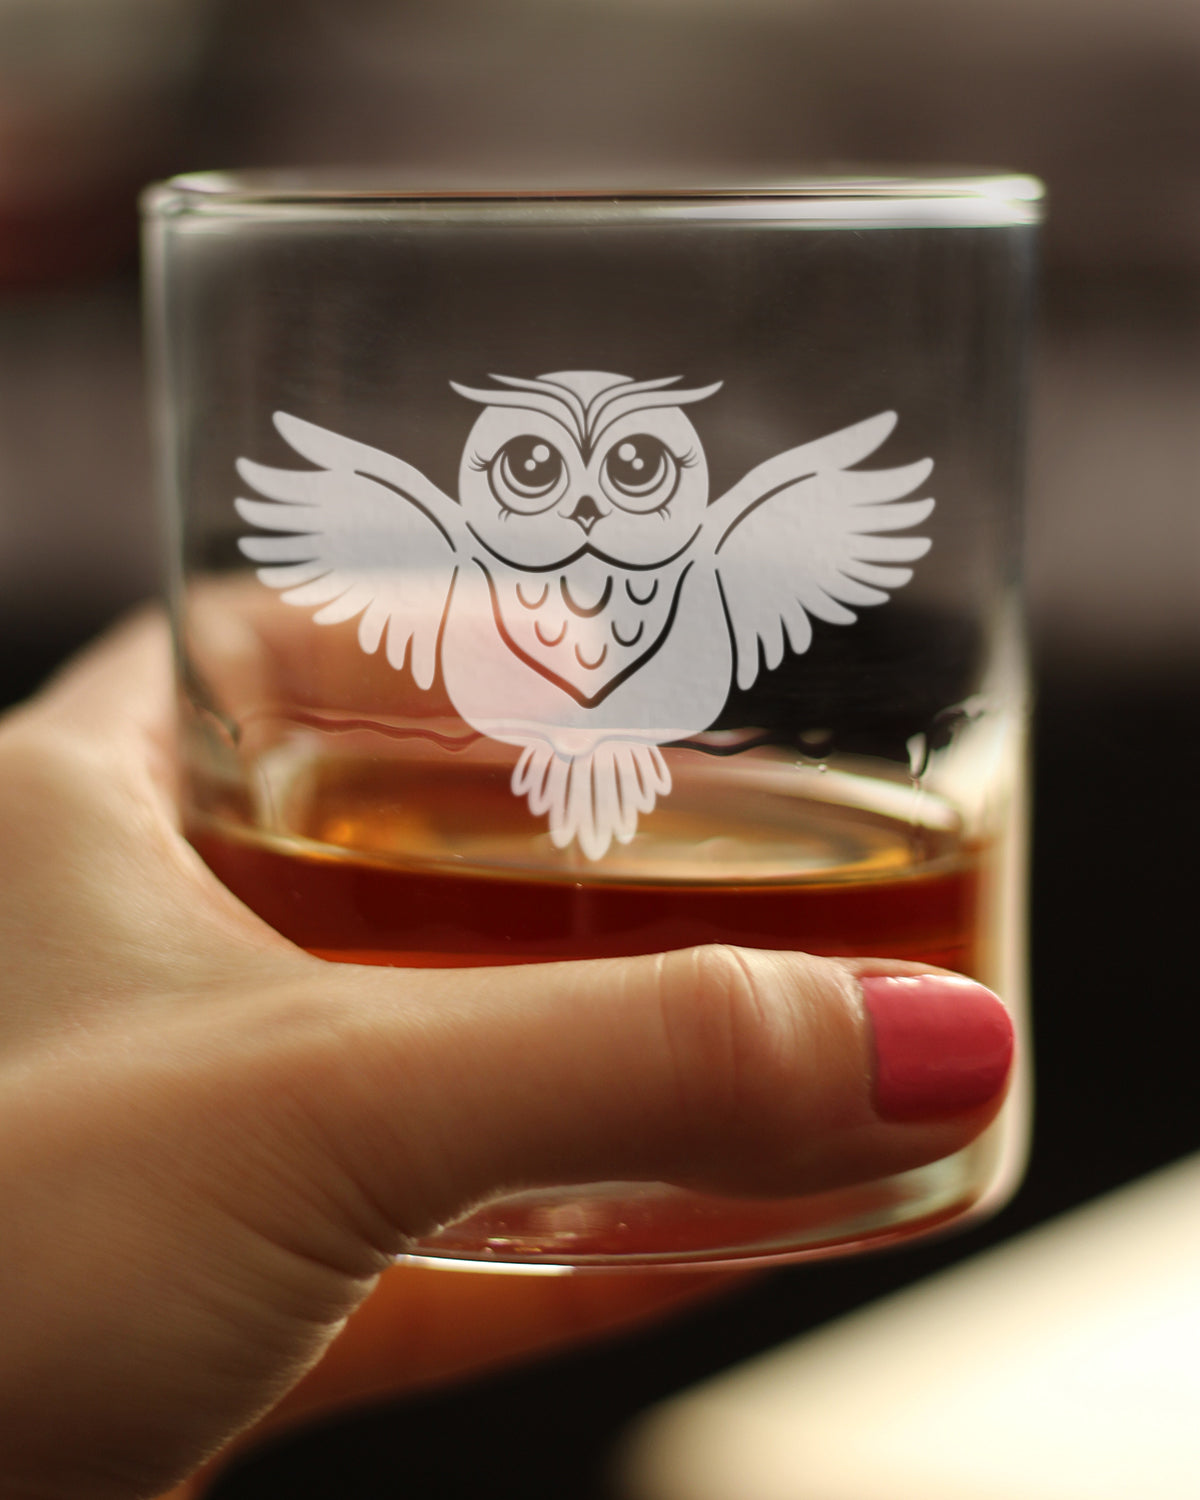 Cute Owl Rocks Glass - Fun Owl Decor and Gifts for Women and Men - 10.25 Oz Glasses